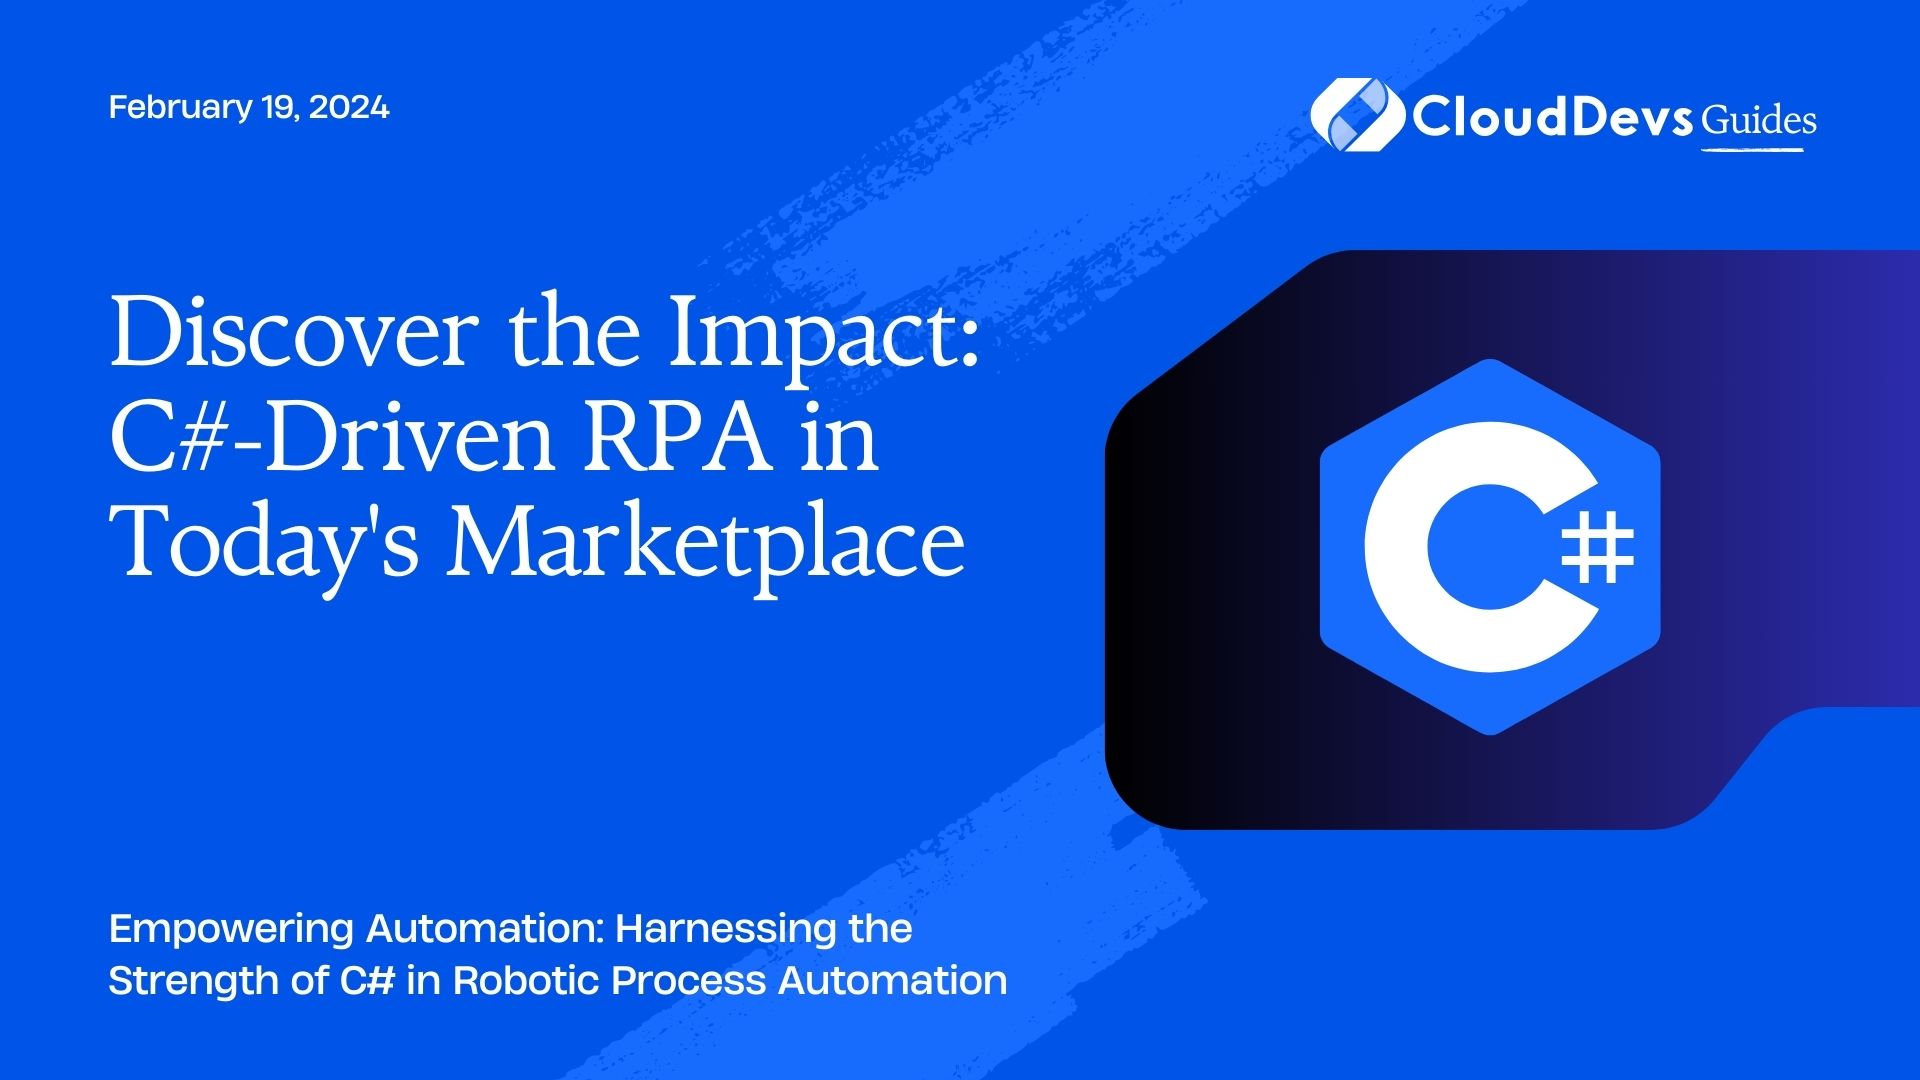 Discover the Impact: C#-Driven RPA in Today's Marketplace